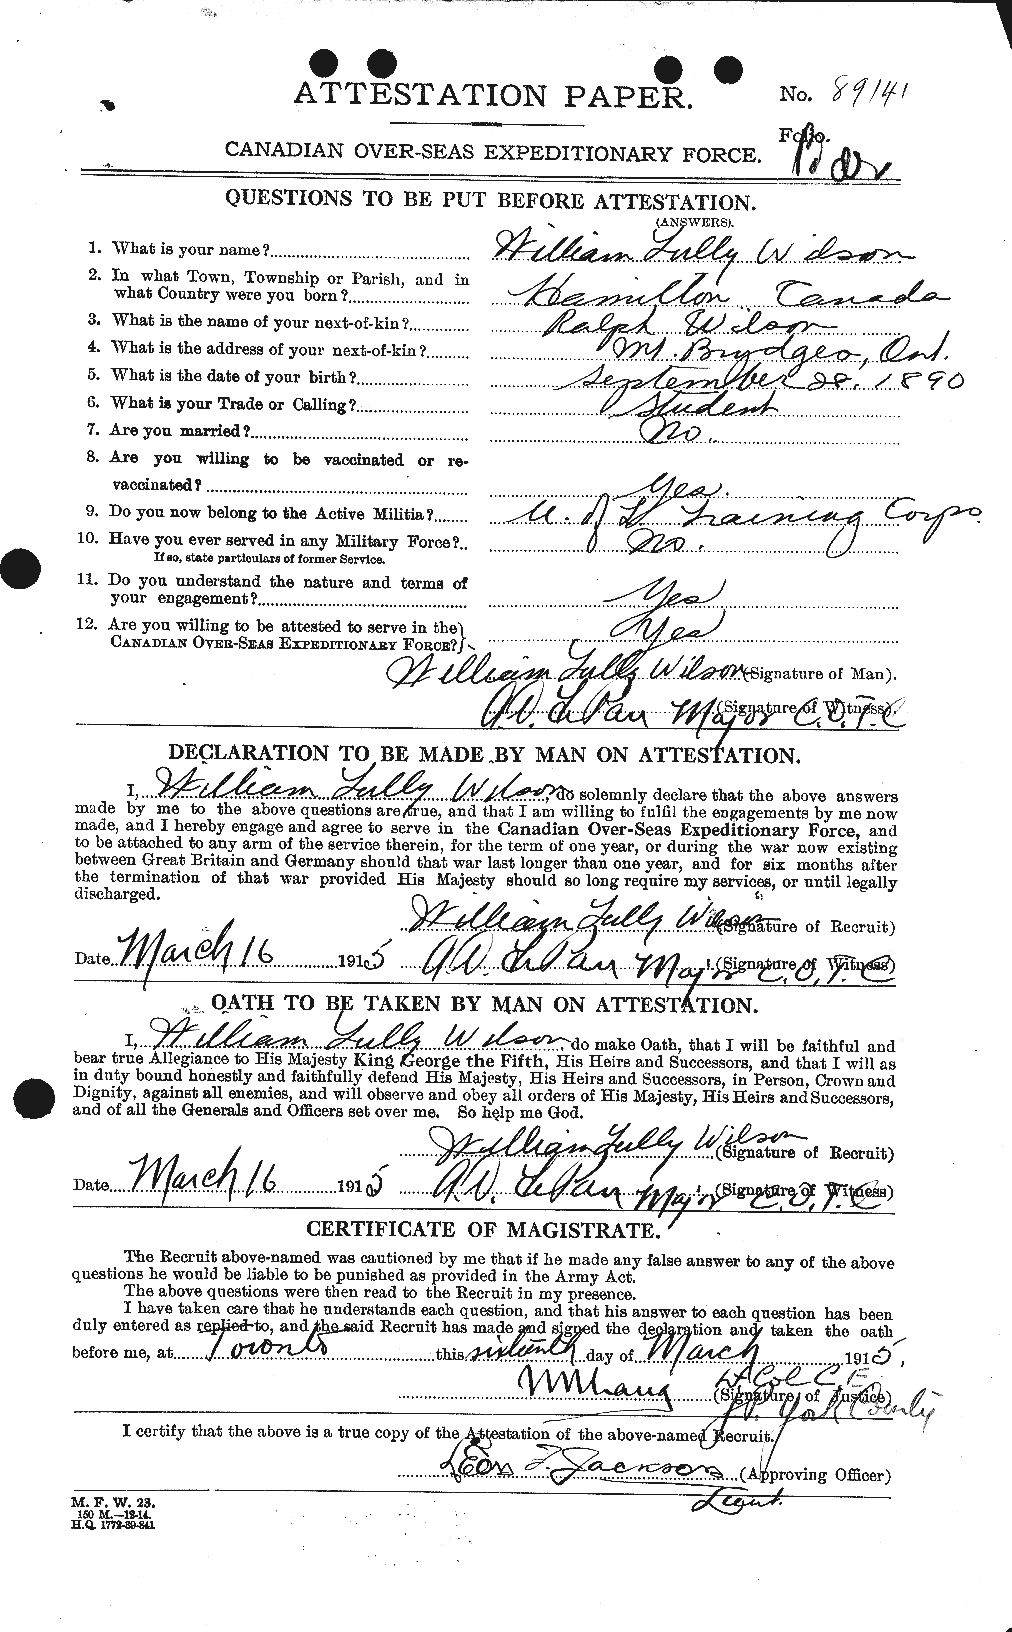 Personnel Records of the First World War - CEF 684115a